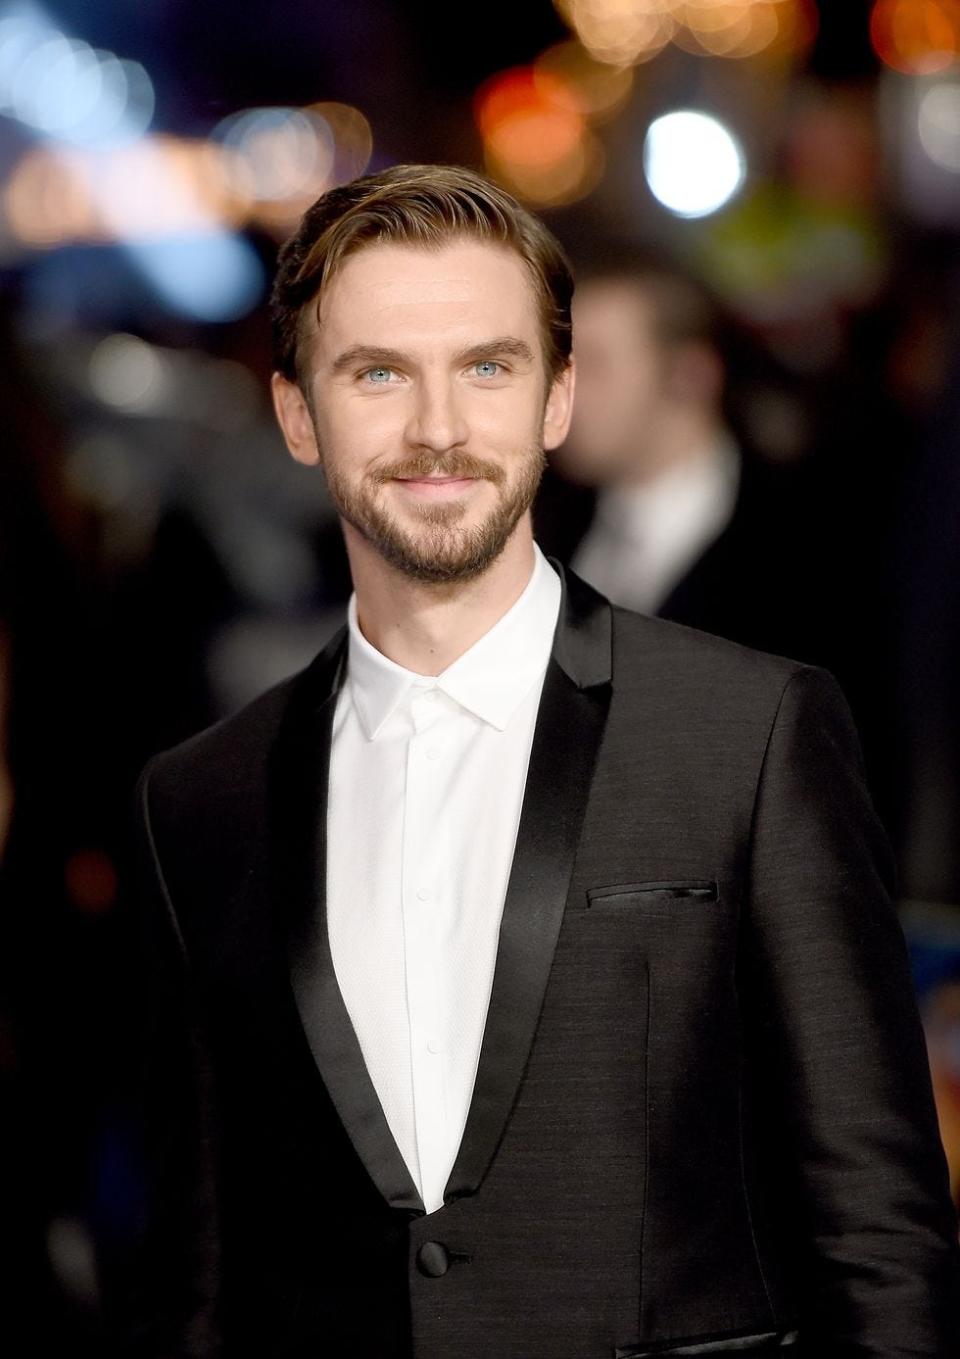 26) Dan Stevens was a judge for the Man Booker Prize.